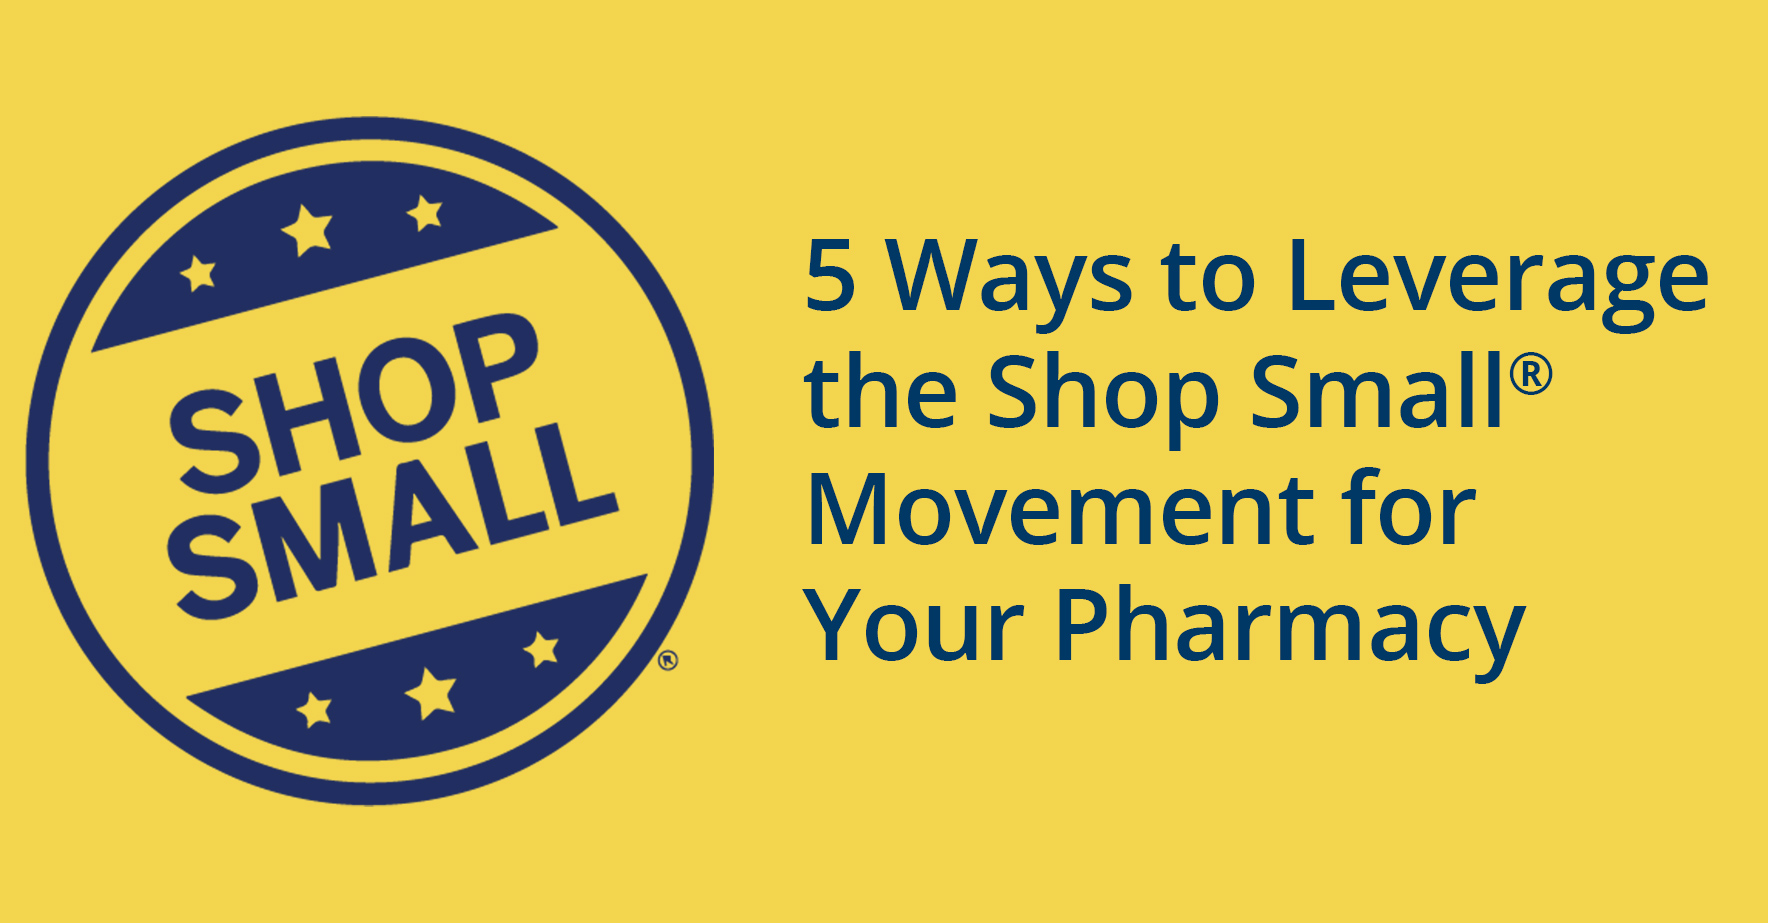 5 _ways_to_leverage_the_shop_small_movement_for_your_pharmacy.jpg